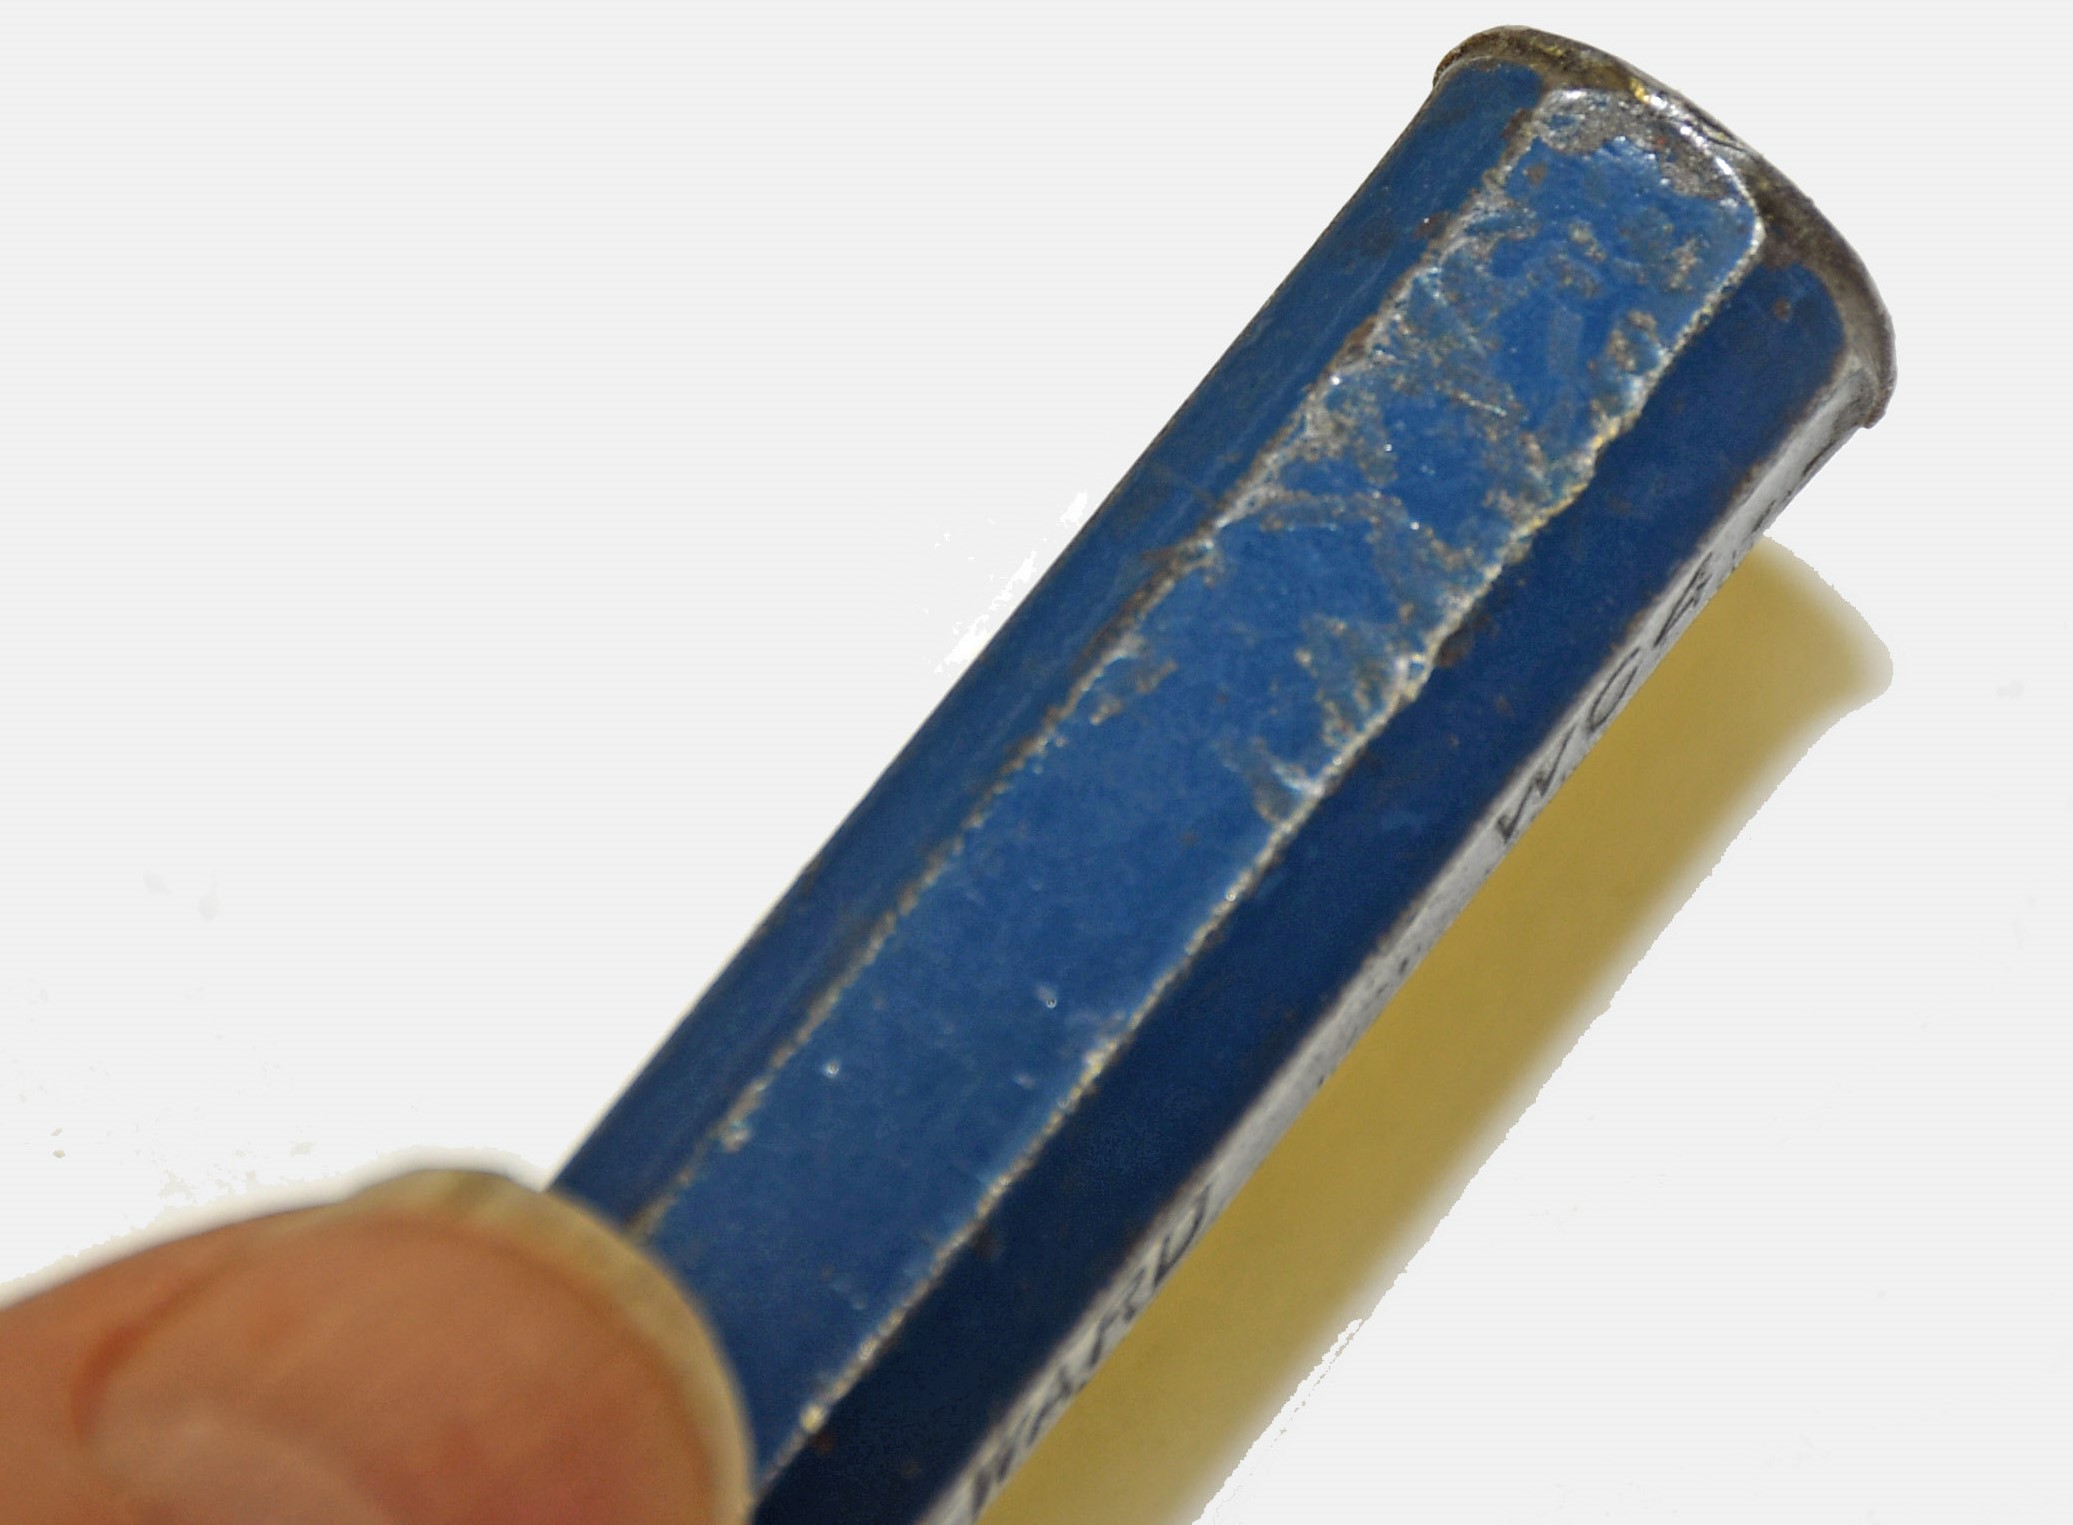 The Most Basic of Hand Tools: Ponder The Forgotten & Often Misused Flat  Chisel